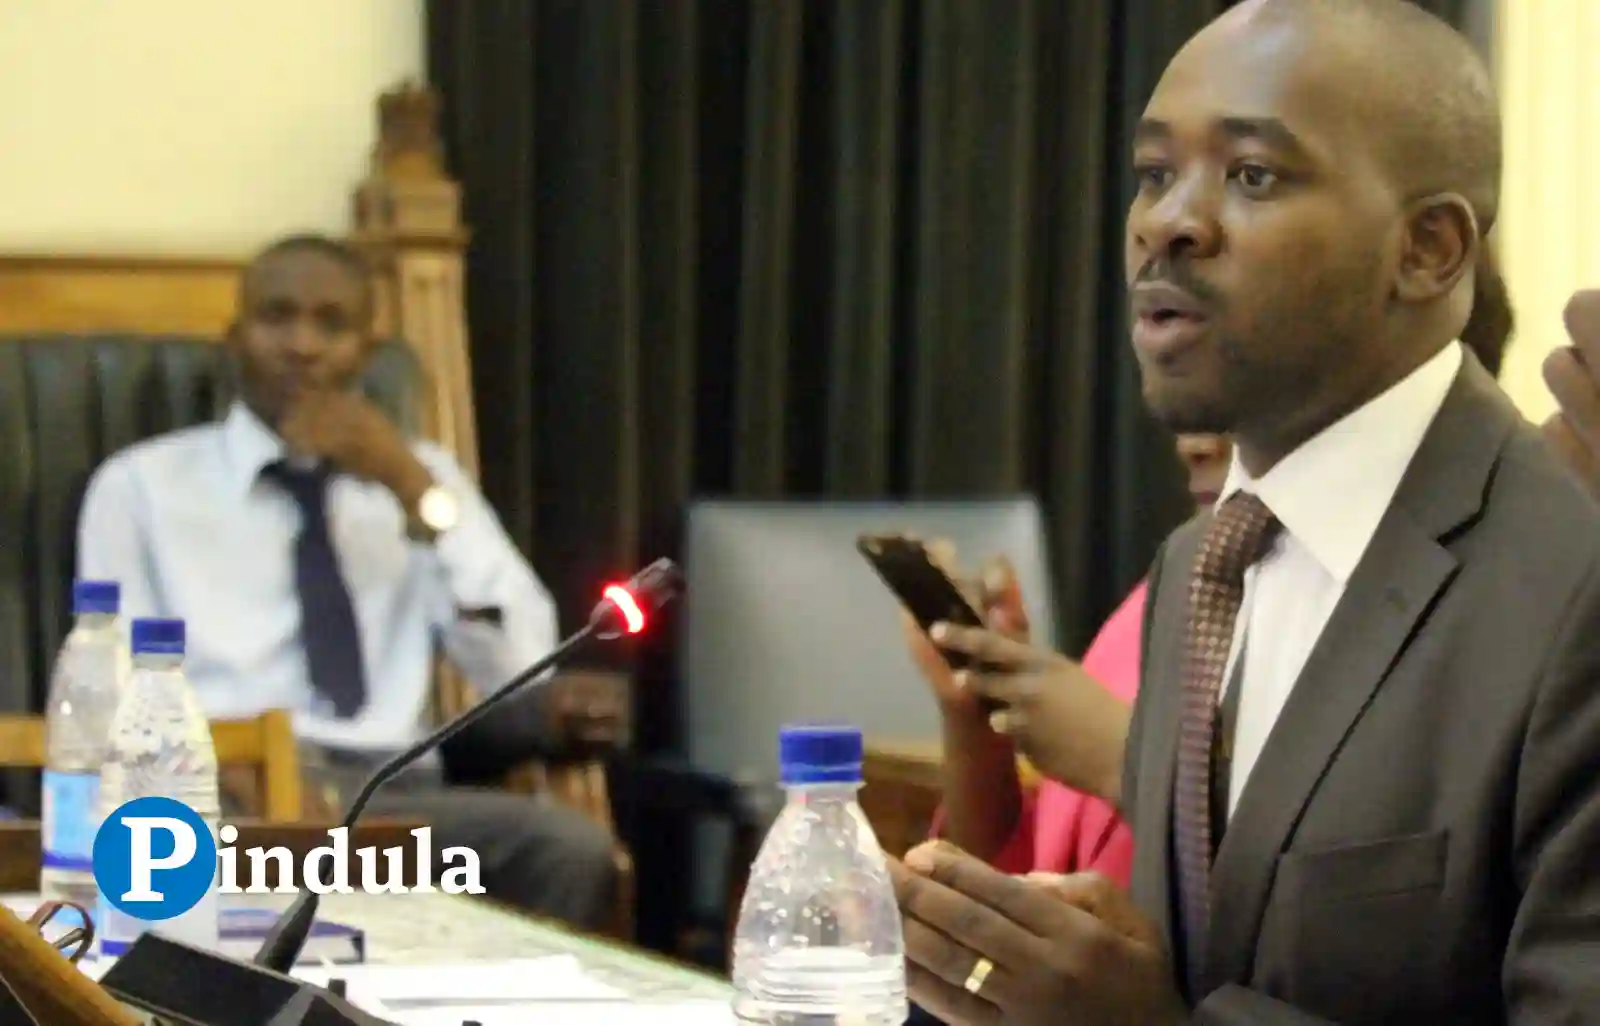 "ITS A NEW DIRECTION: Every Vote Matters" - Nelson Chamisa On MDC's 22nd Anniversary (Full Text)